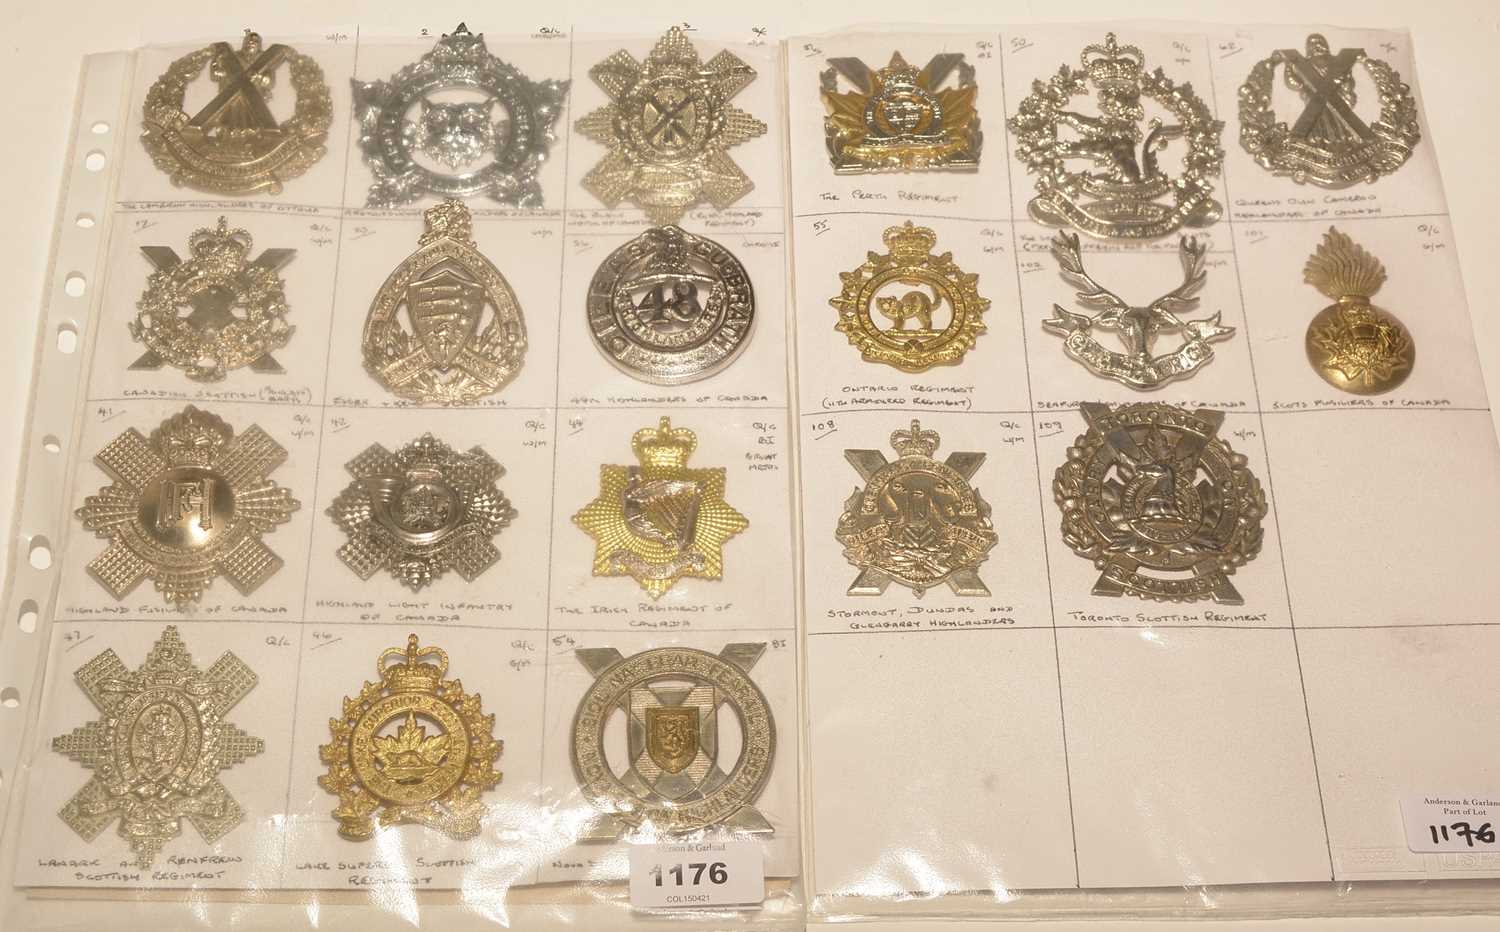 Lot 1176 - A collection of 20 Post 1950's Canadian Glengarry badges.